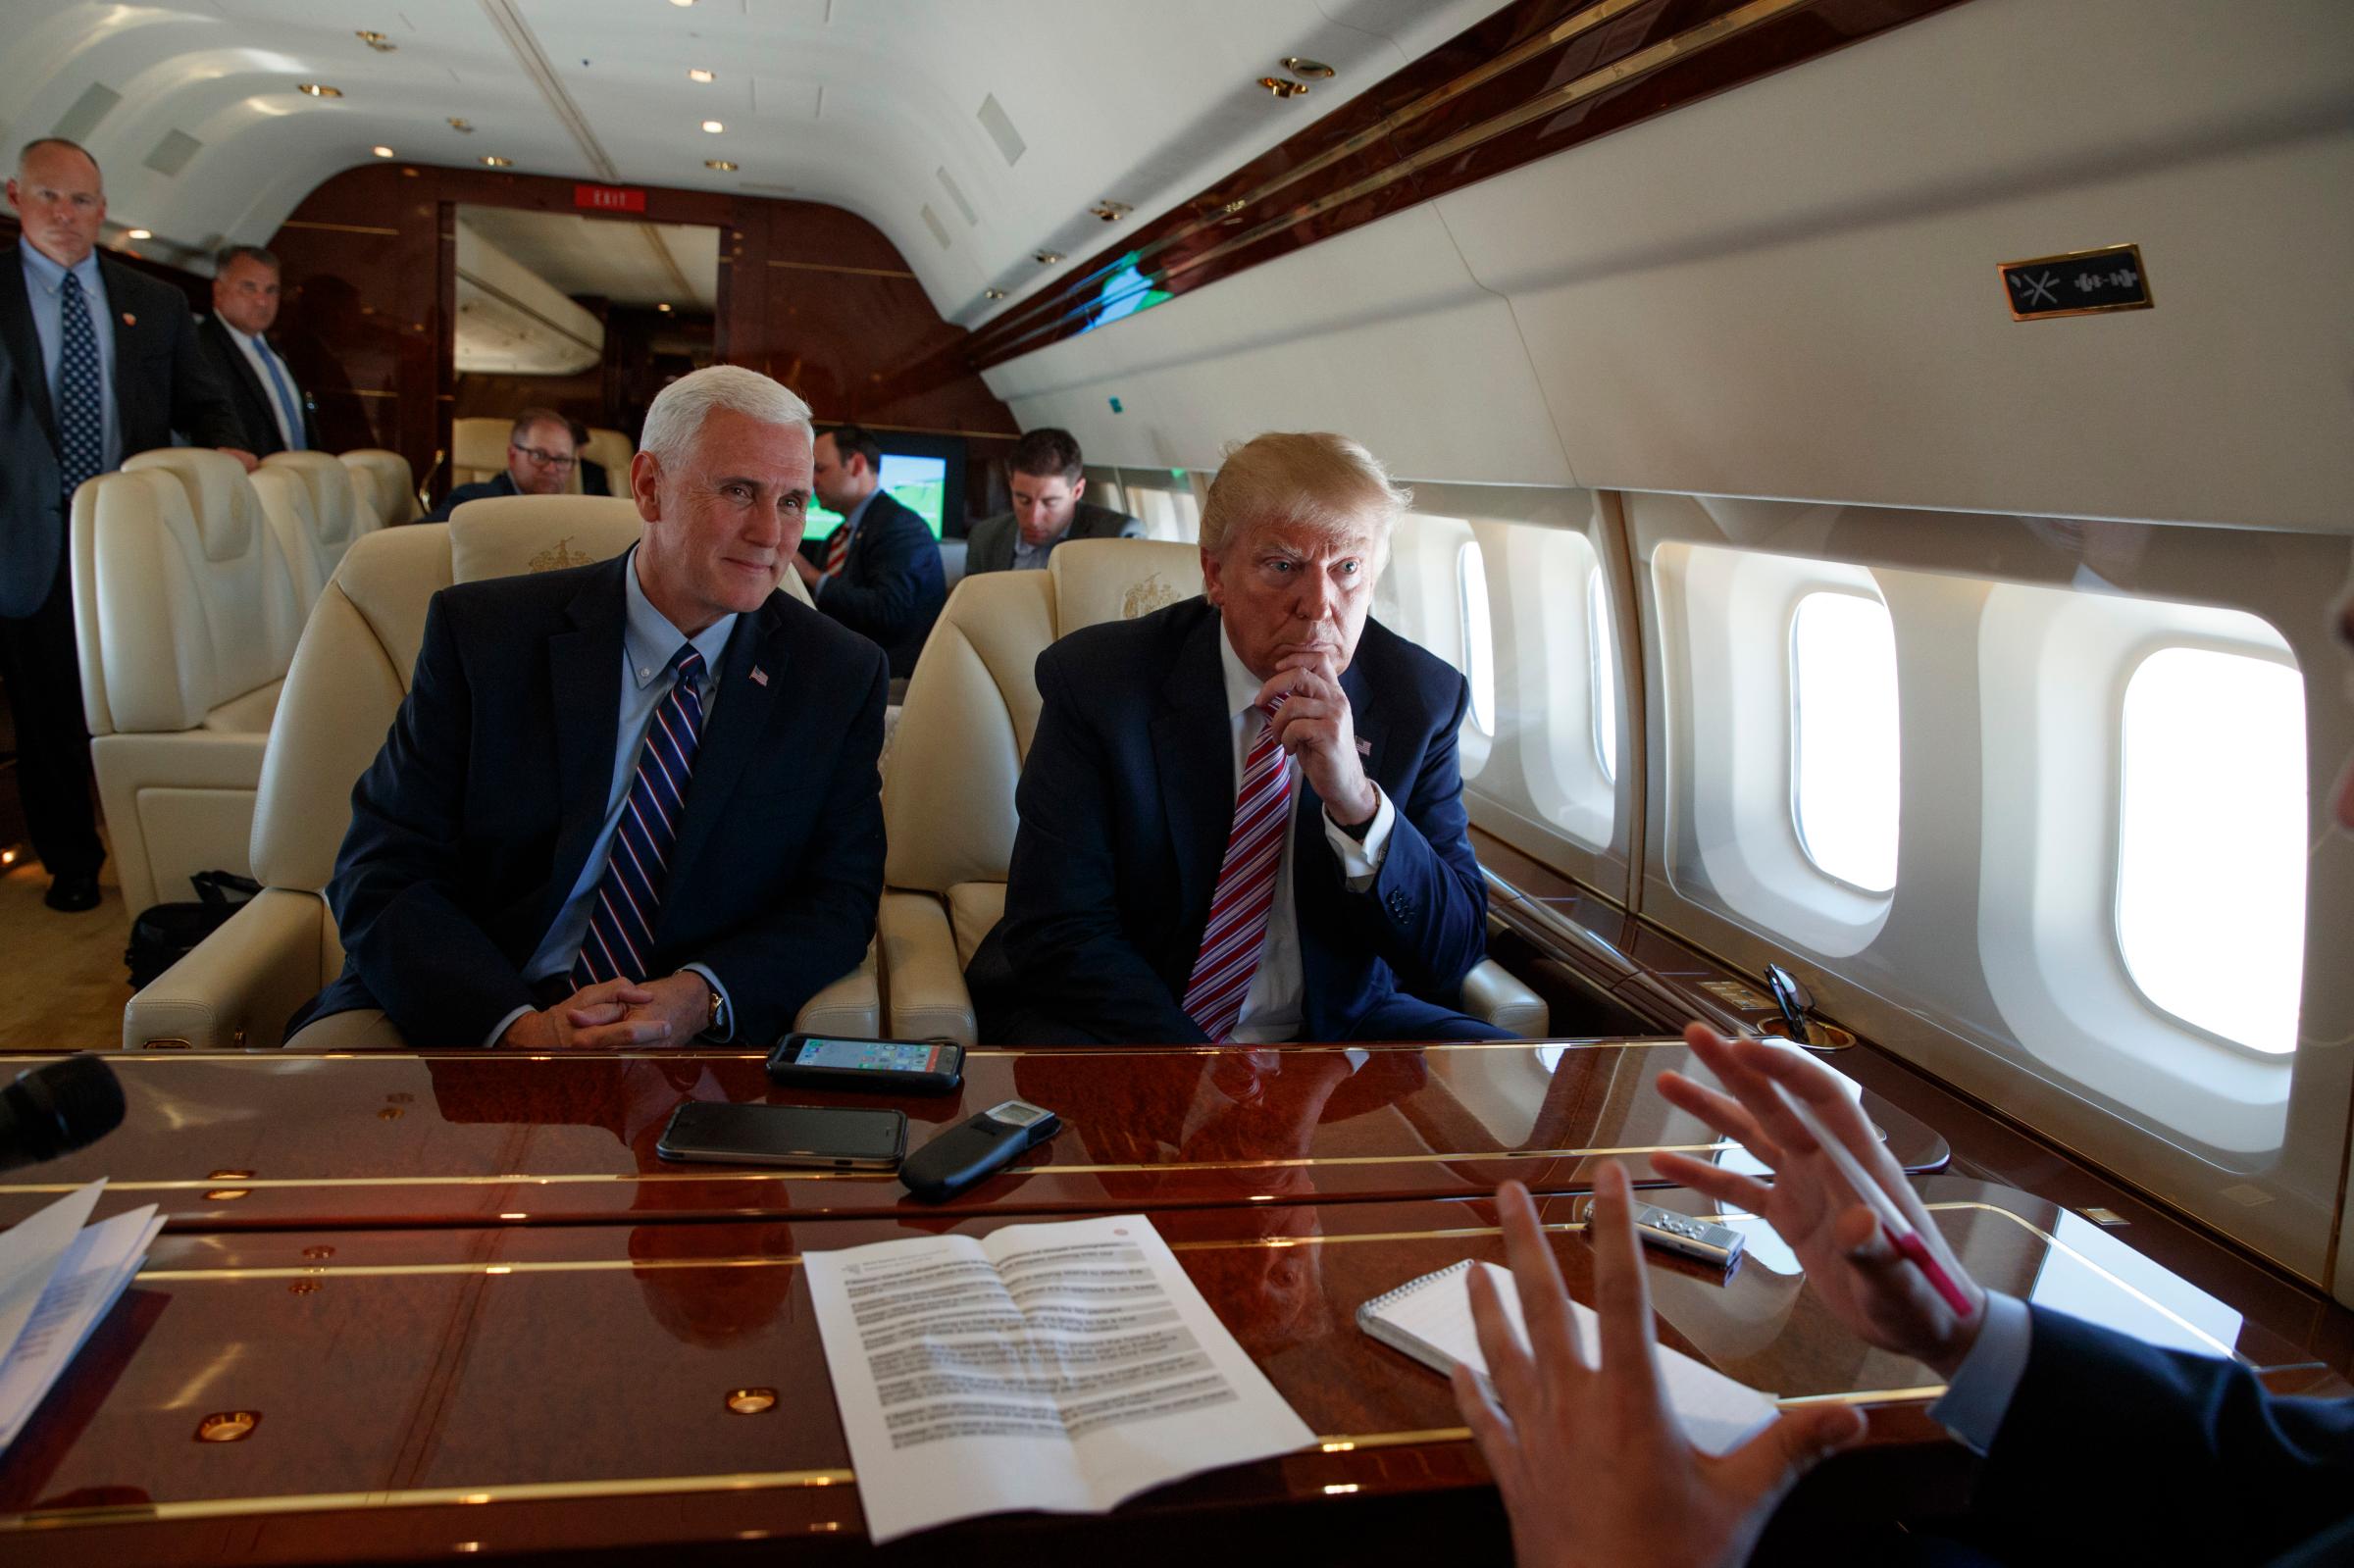 Republican presidential candidate Donald Trump talks with press, Sept. 5, 2016, aboard his campaign plane while flying over Ohio, as Vice presidential candidate Gov. Mike Pence, R-Ind., left, looks on.